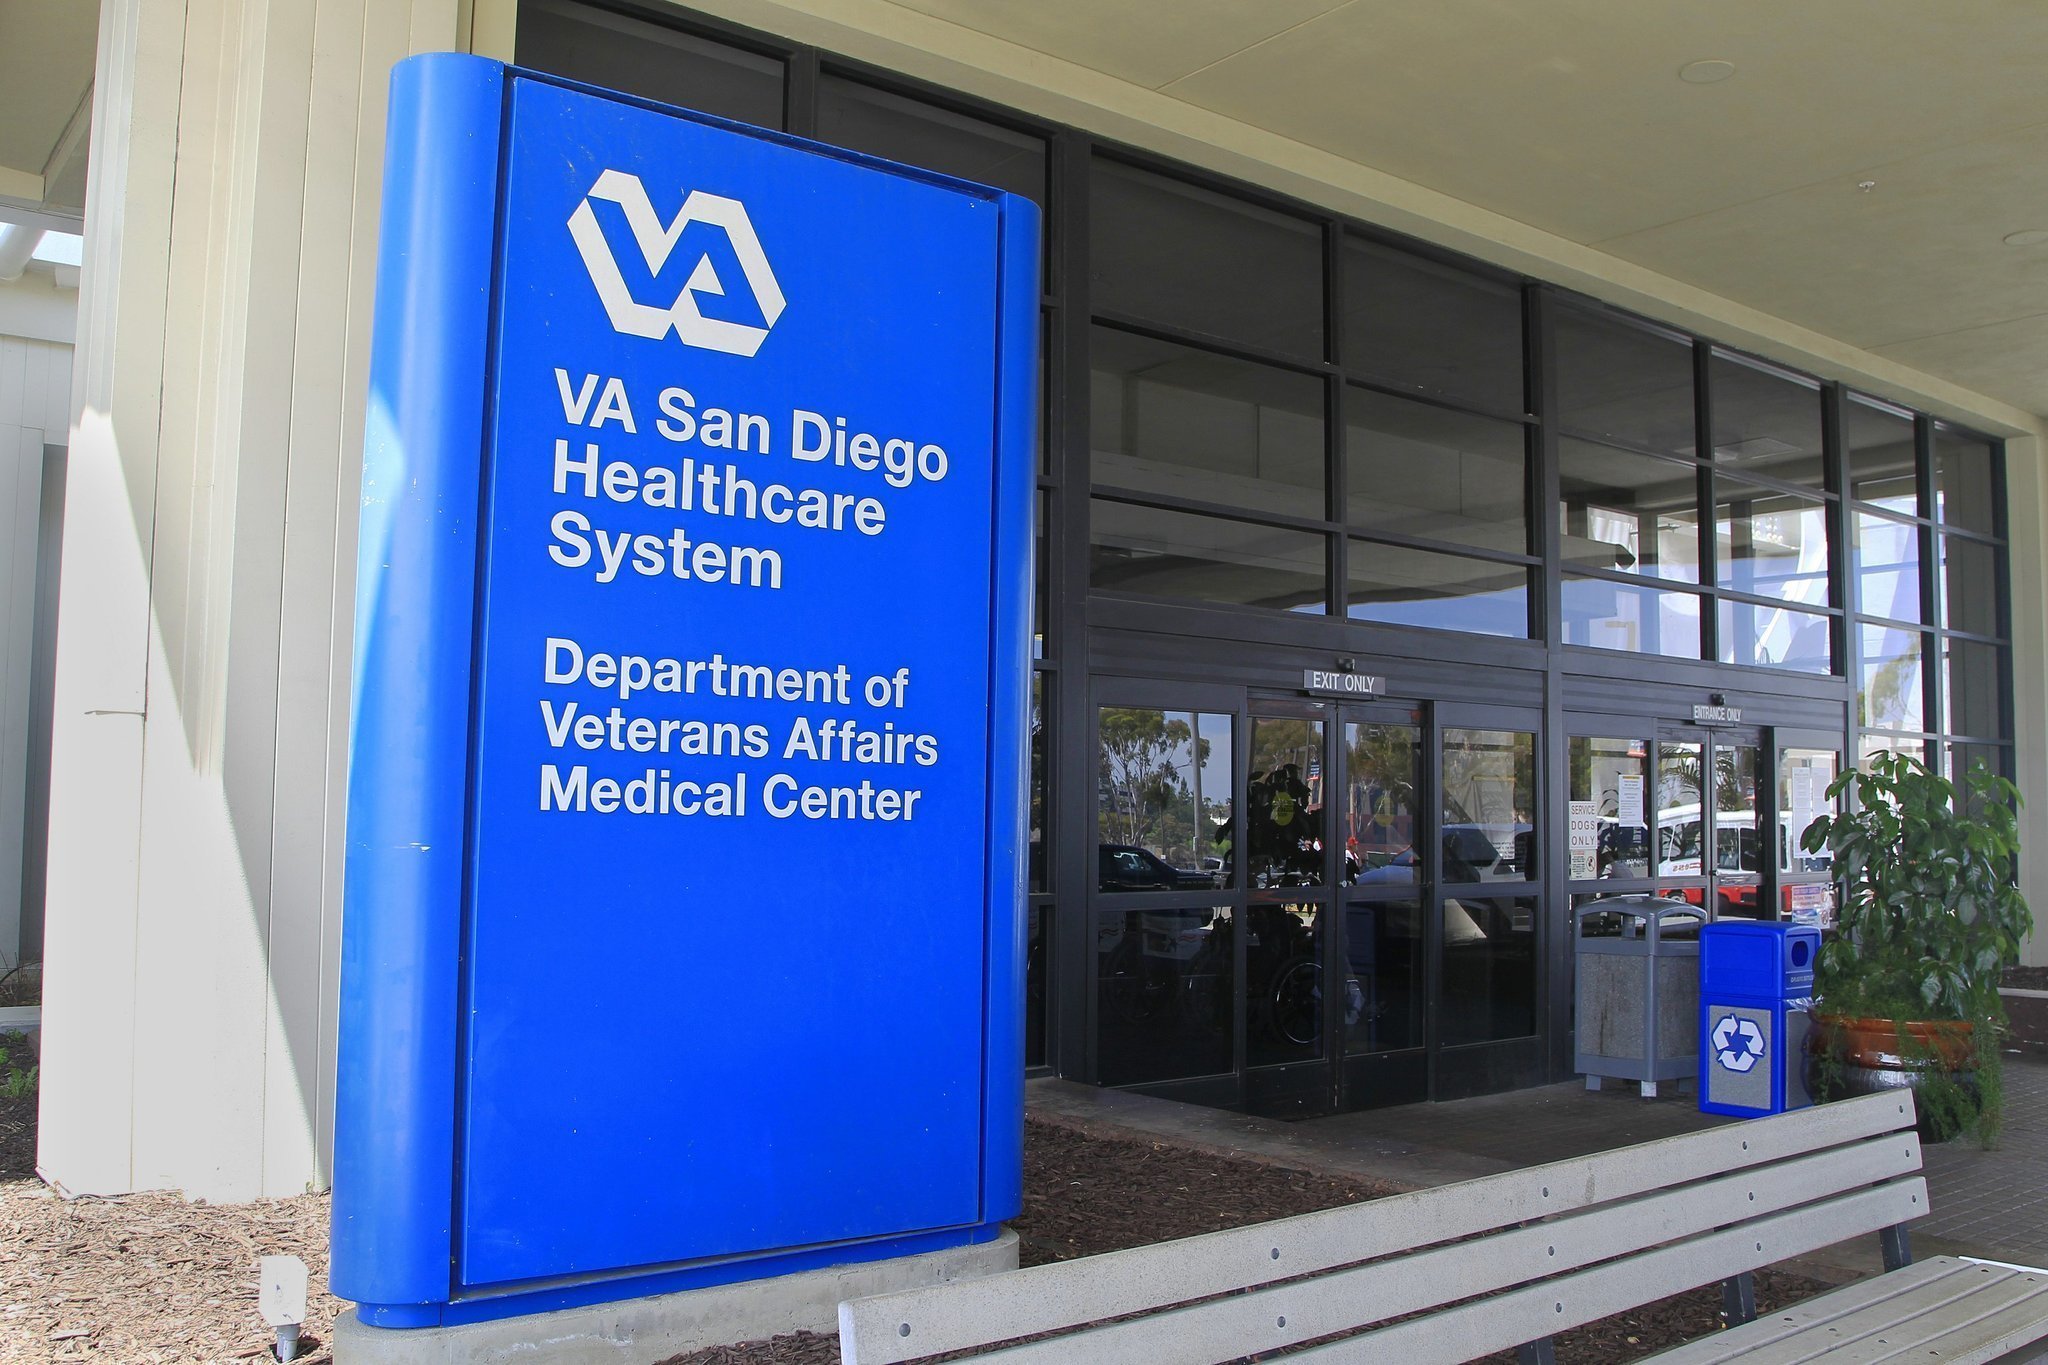 What services are offered at La Jolla VA Hospital?